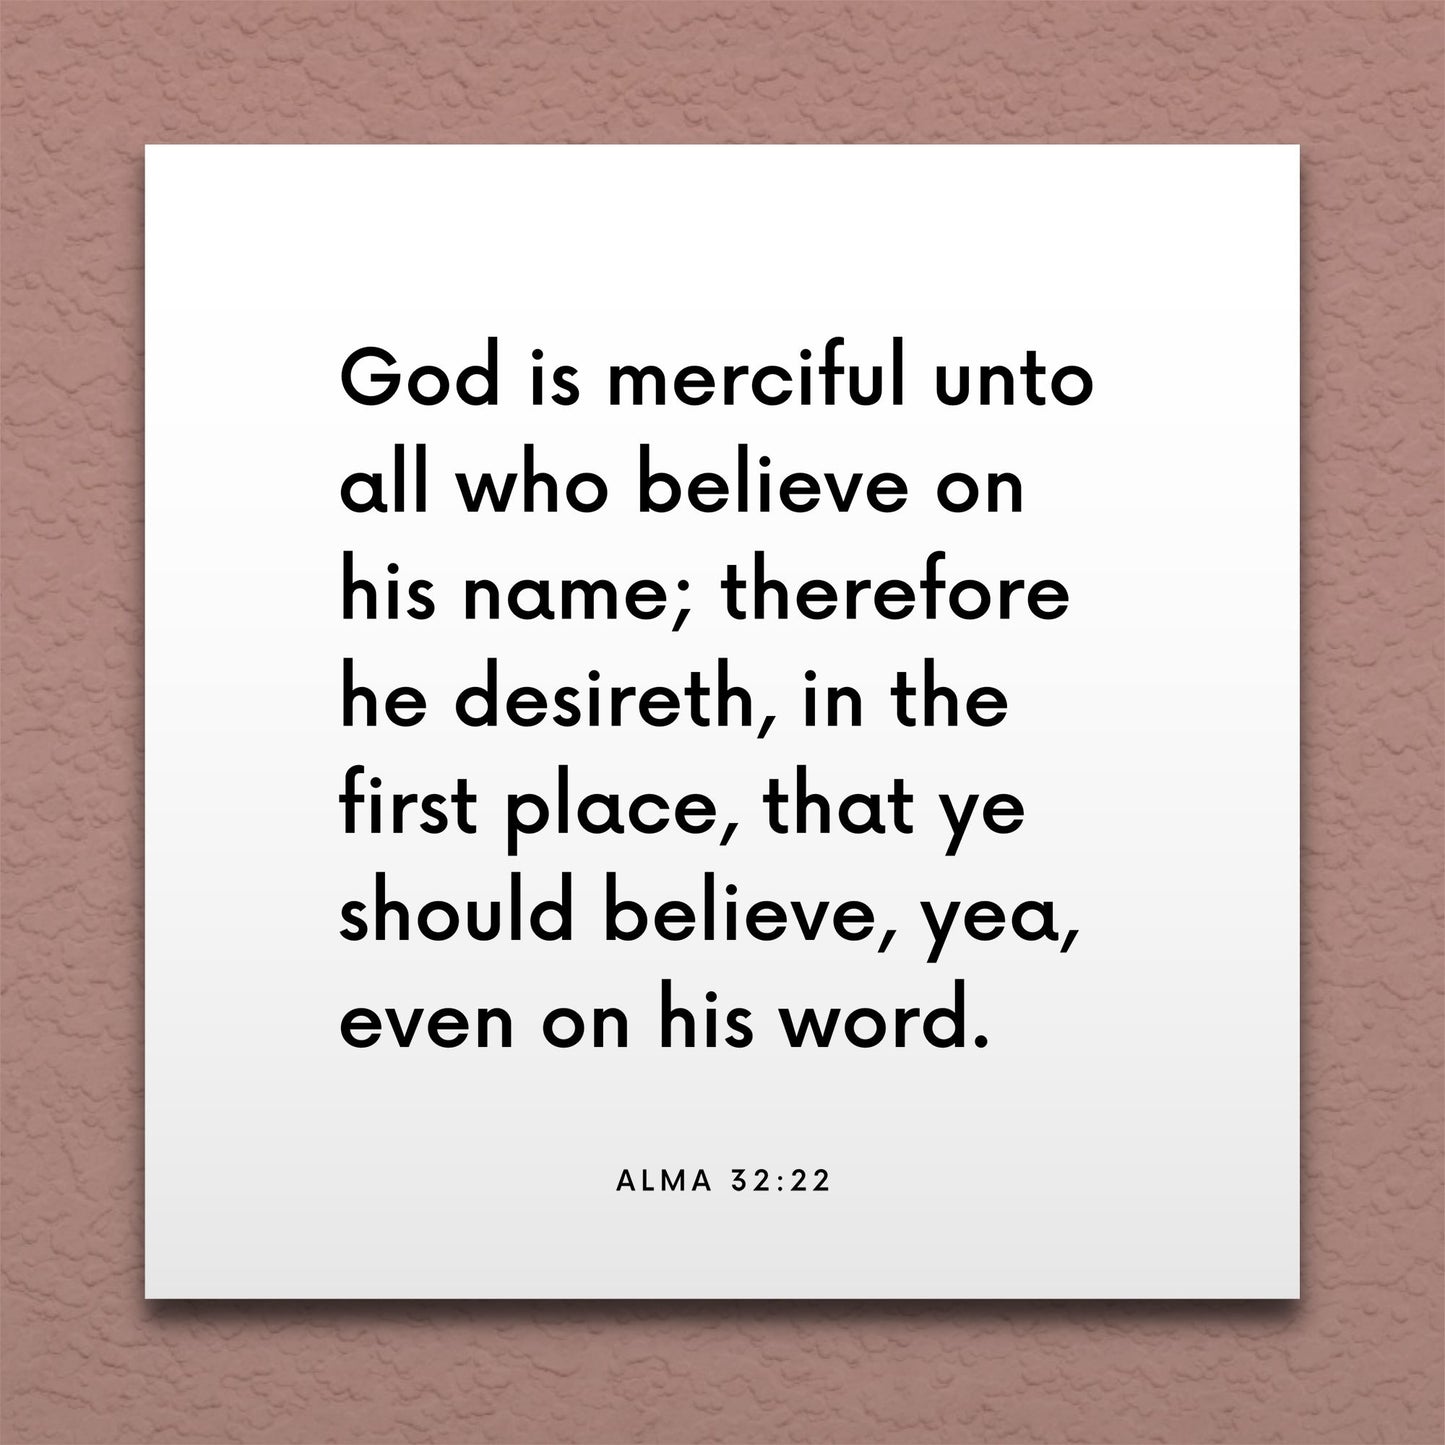 Wall-mounted scripture tile for Alma 32:22 - "God is merciful unto all who believe on his name"